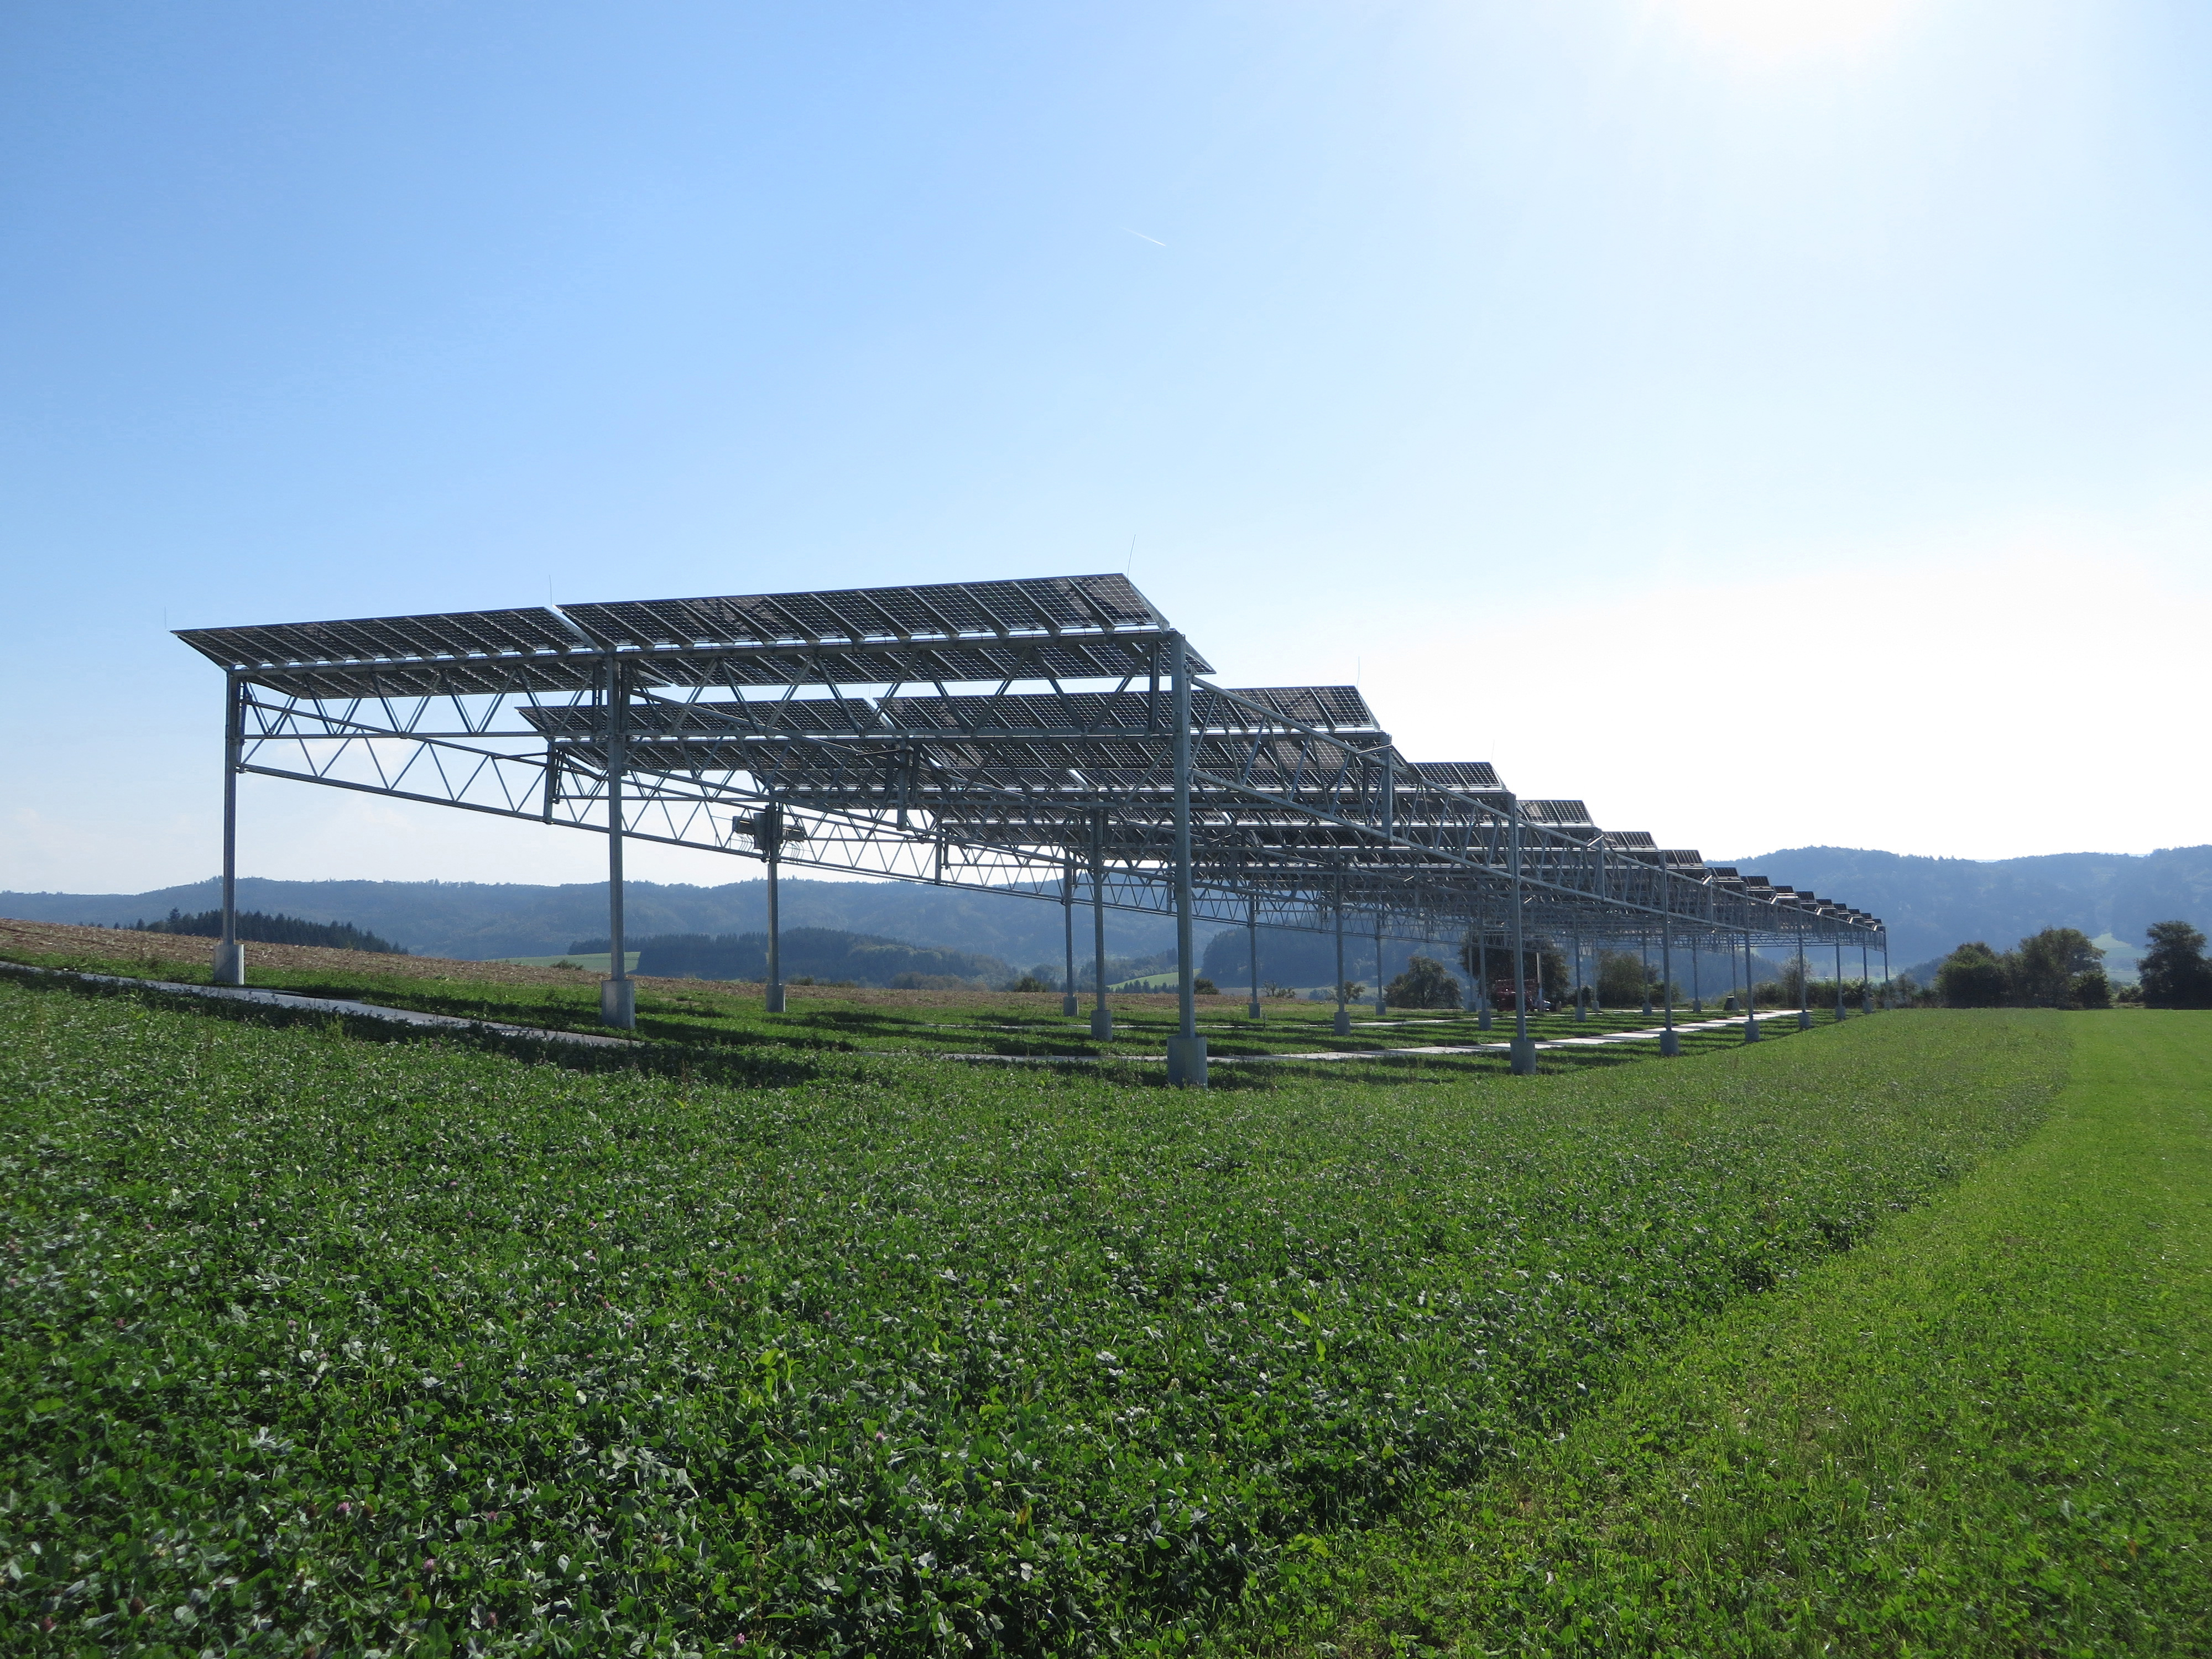 Agrophotovoltaics combines agricultural production and electric energy generation by photovoltaics on the same piece of land. The pilot installation in Heggelbach near Lake Constance, Germany is shown here. 